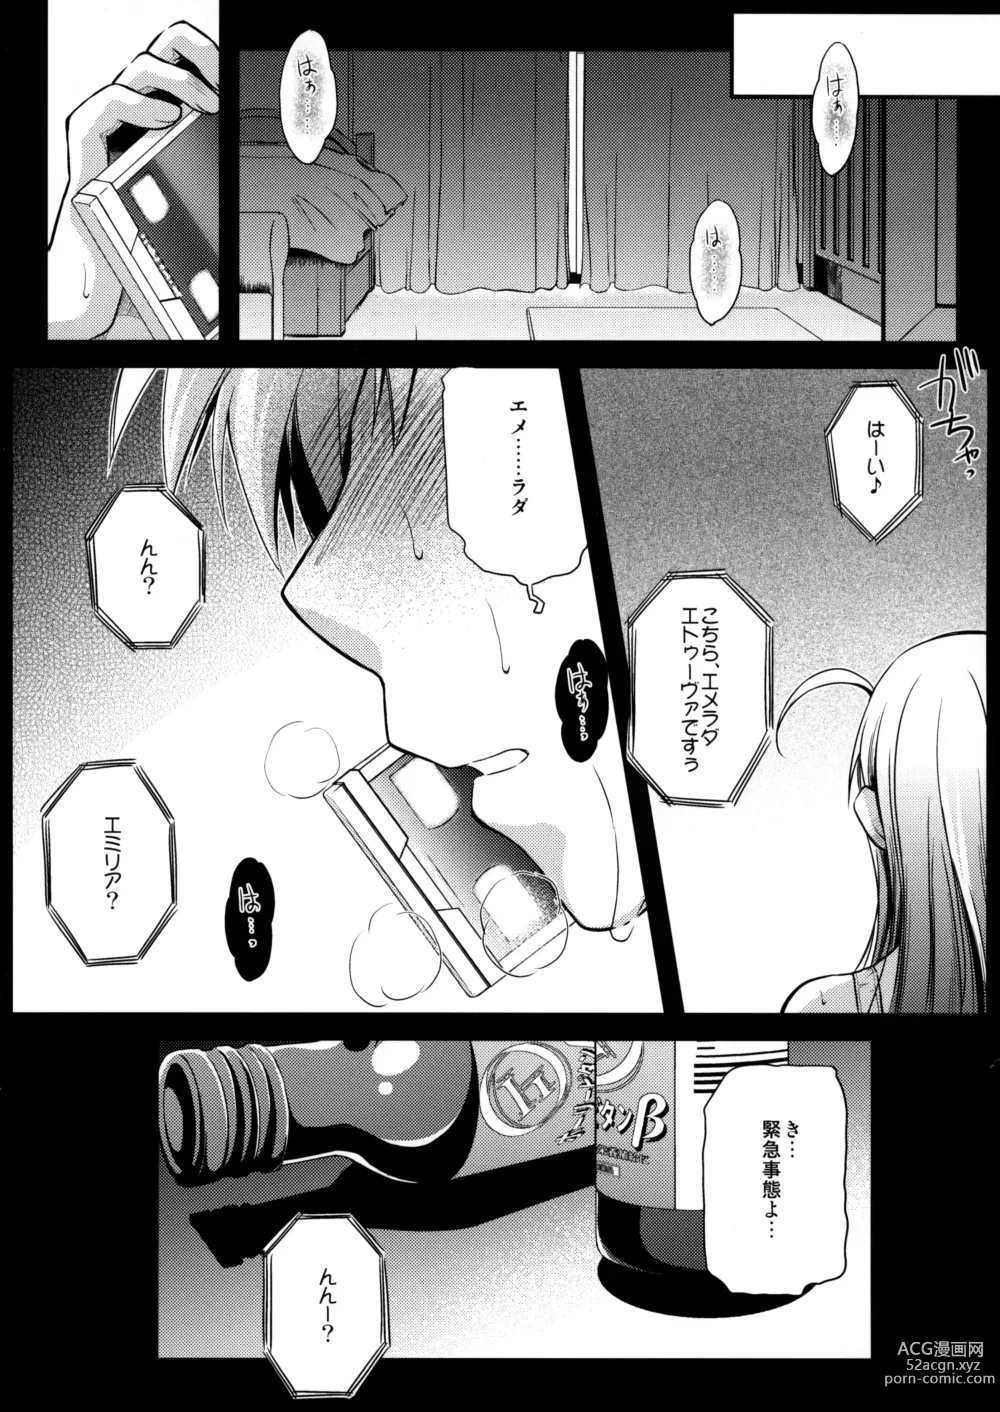 Page 4 of doujinshi Holy∞